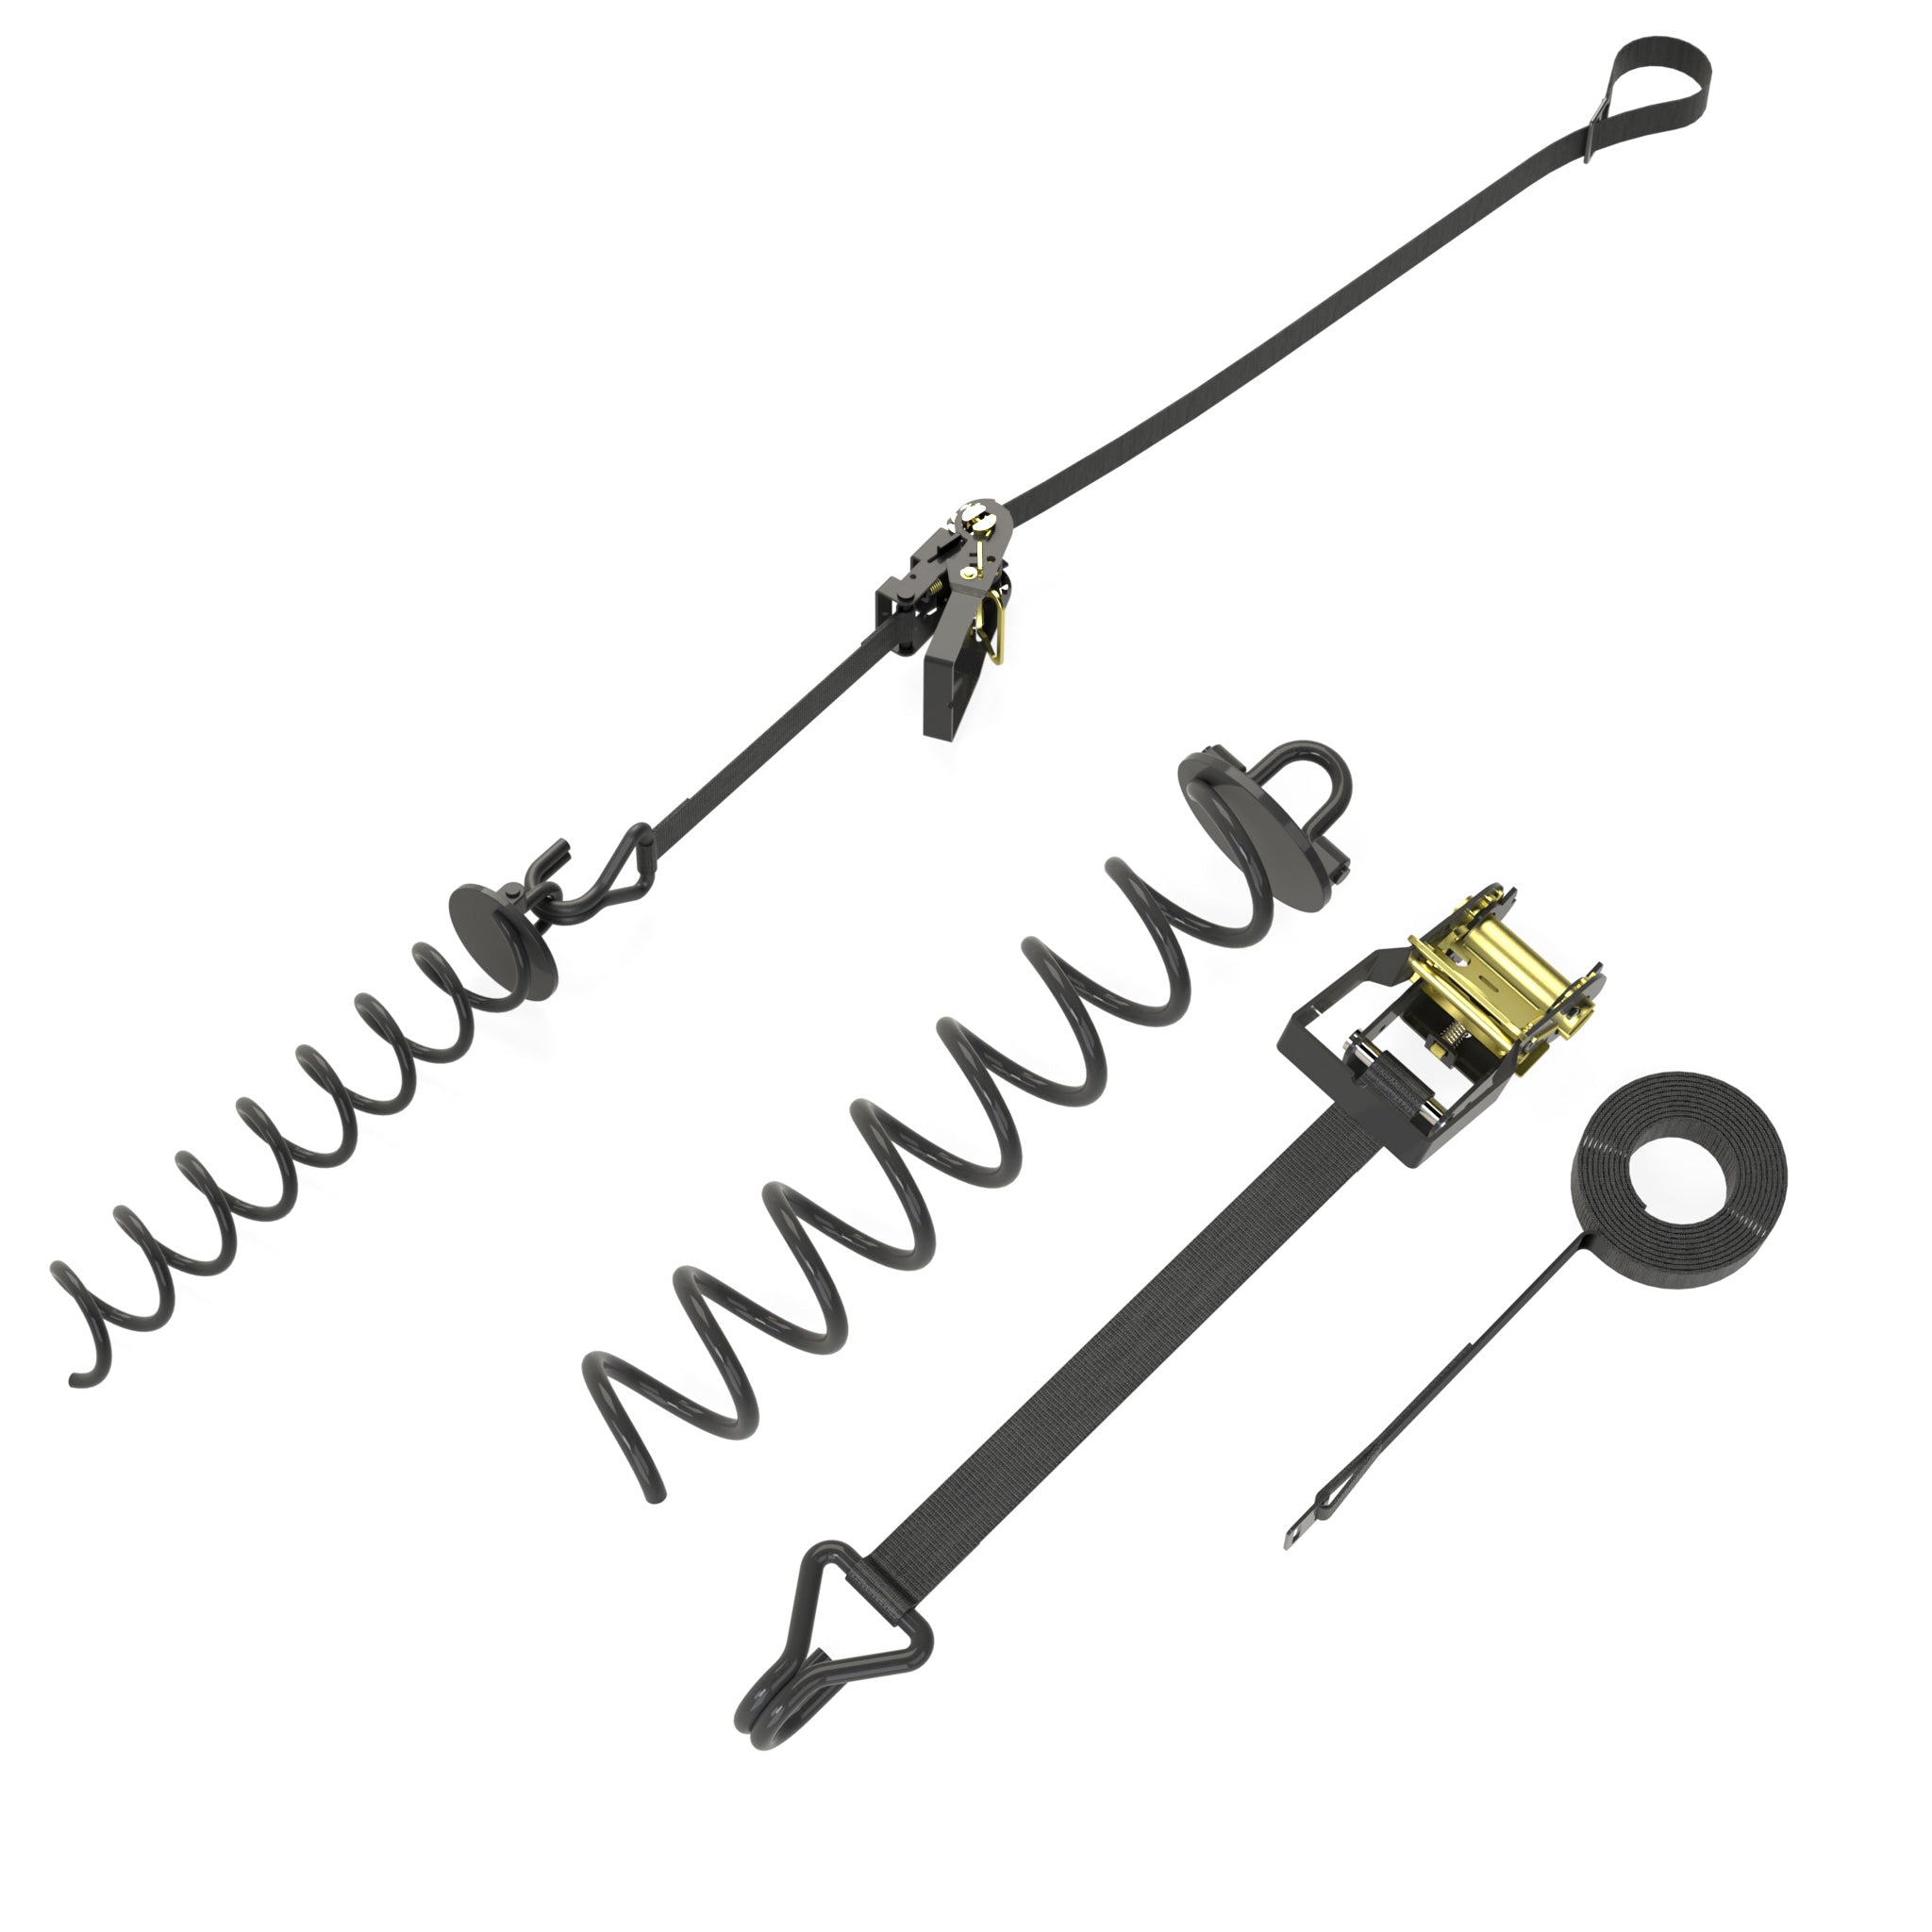 Acon trampoline anchor - assembled and parts